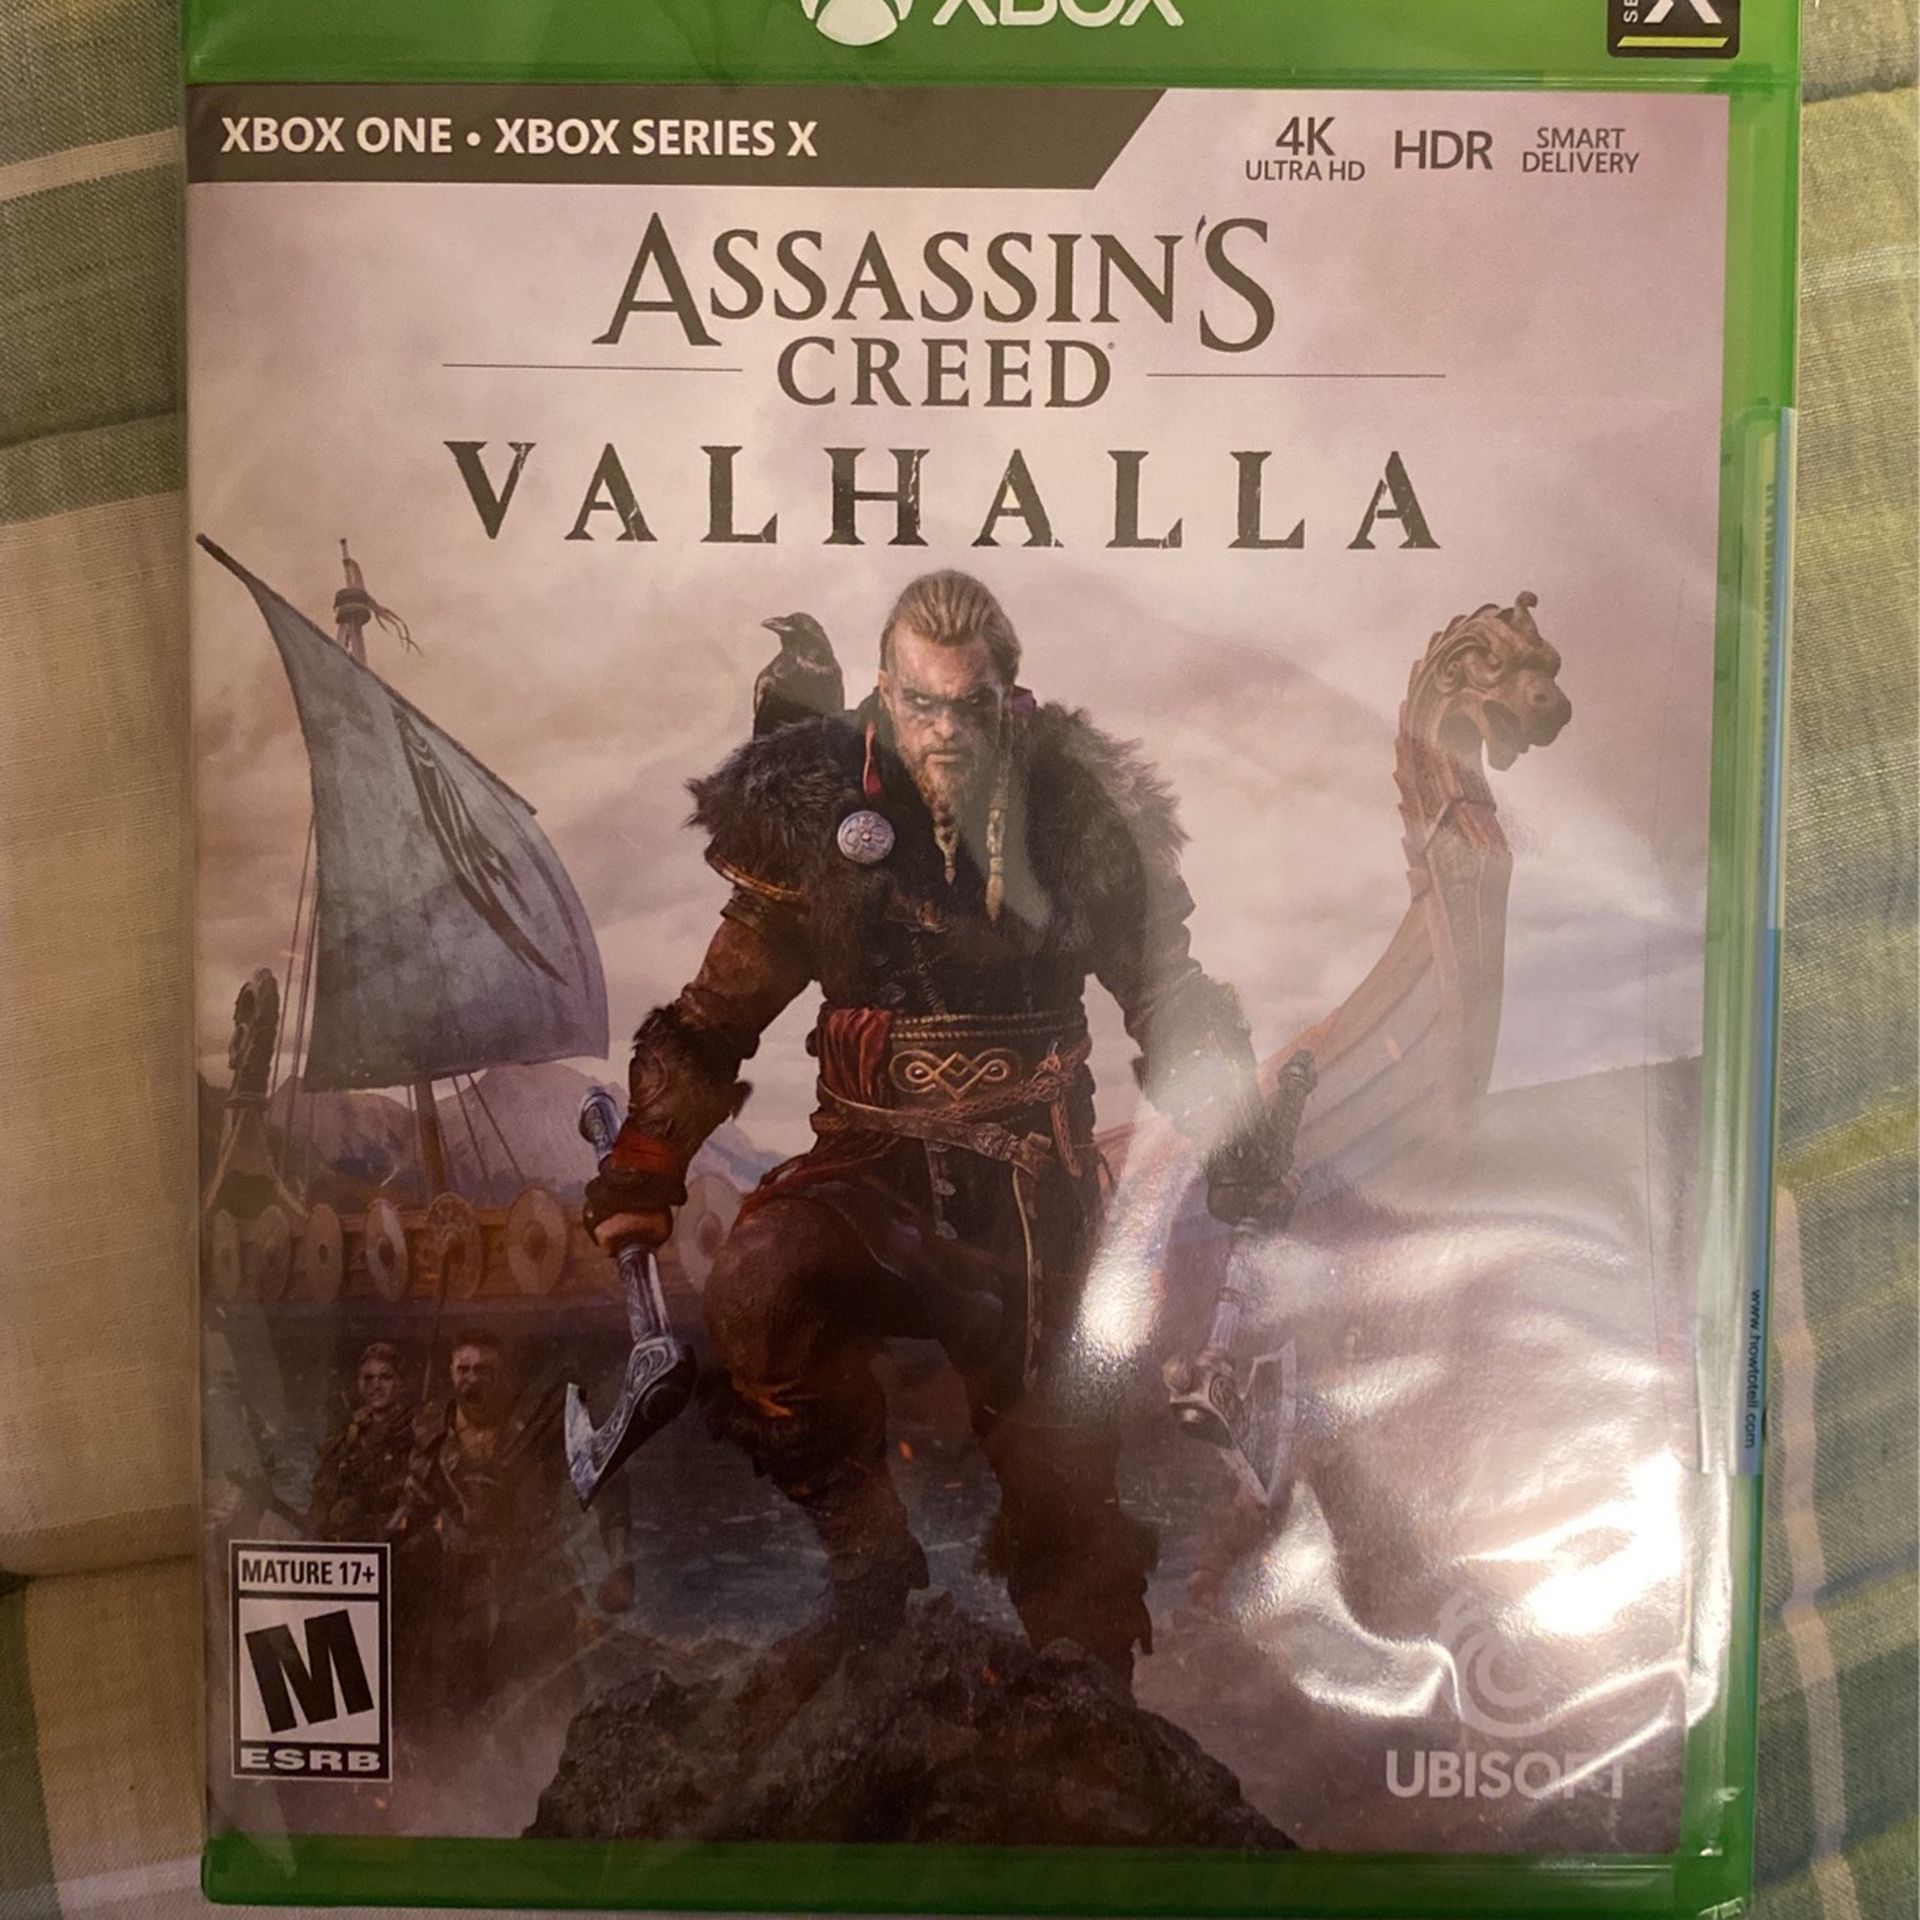 Assassin's Creed Valhalla, Xbox Series X, Series S, Xbox One, NEW and SEALED